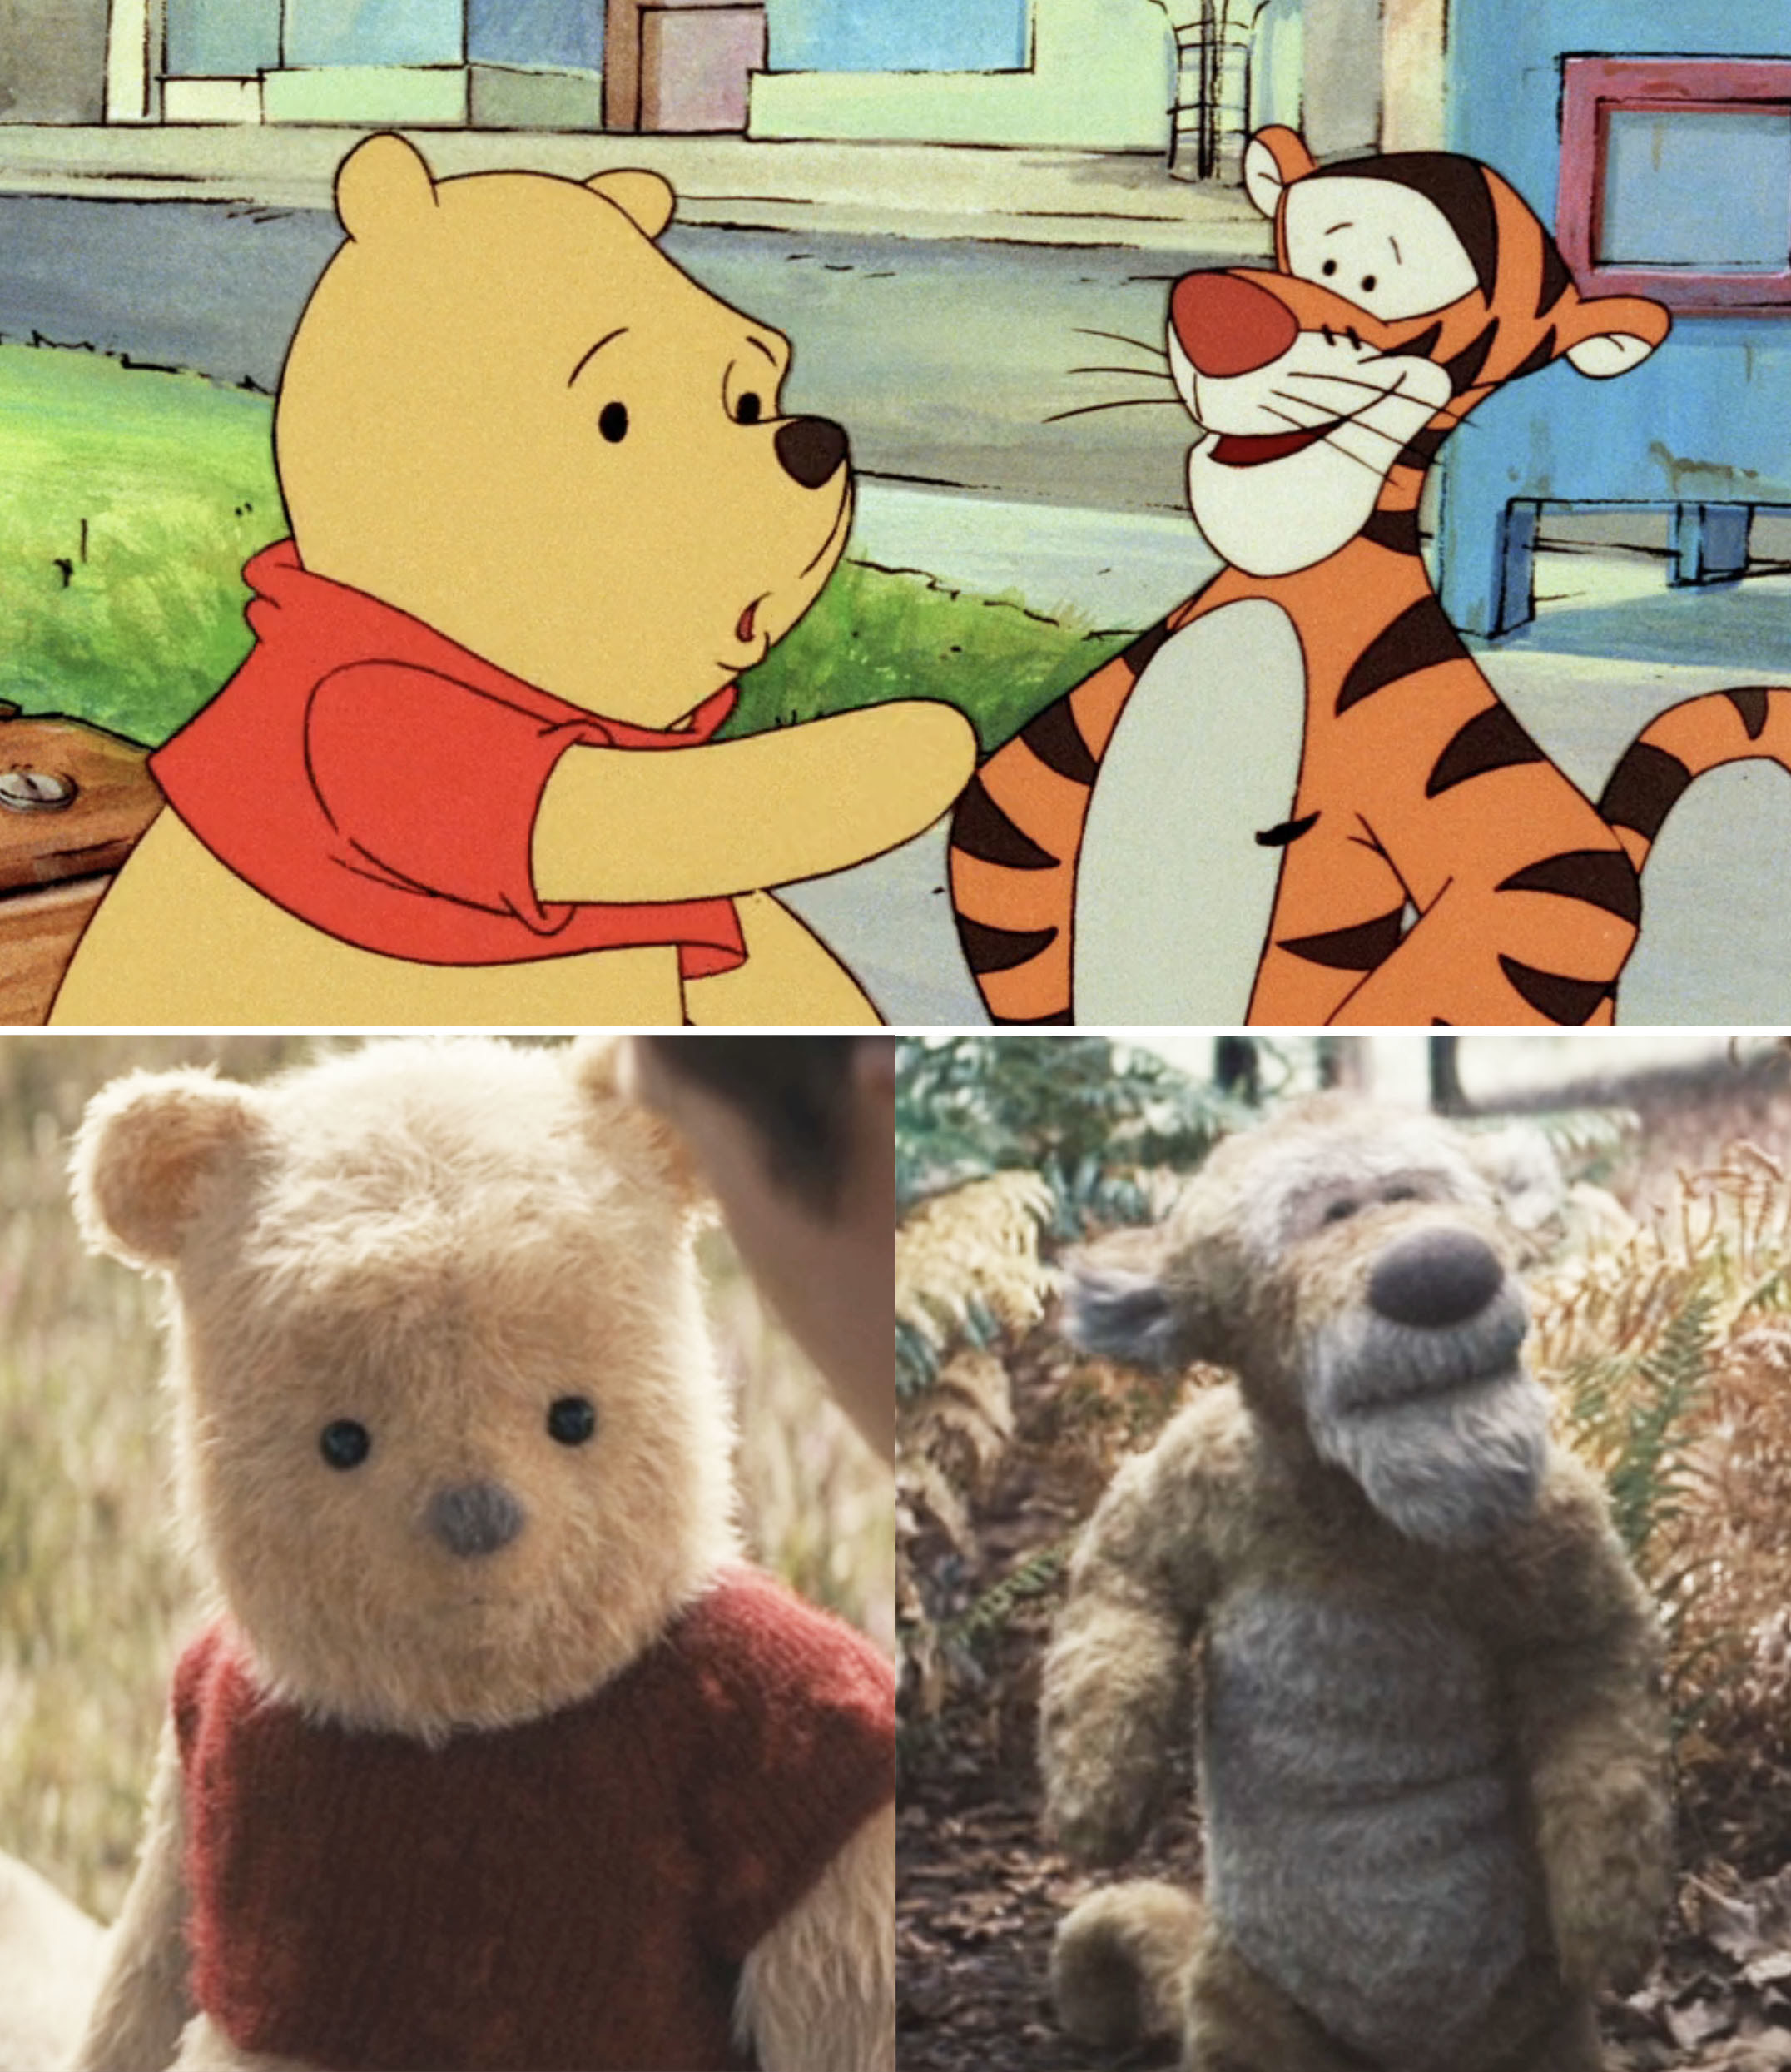 Screen grabs from &quot;Winnie the Pooh&quot; and &quot;Christopher Robin&quot;